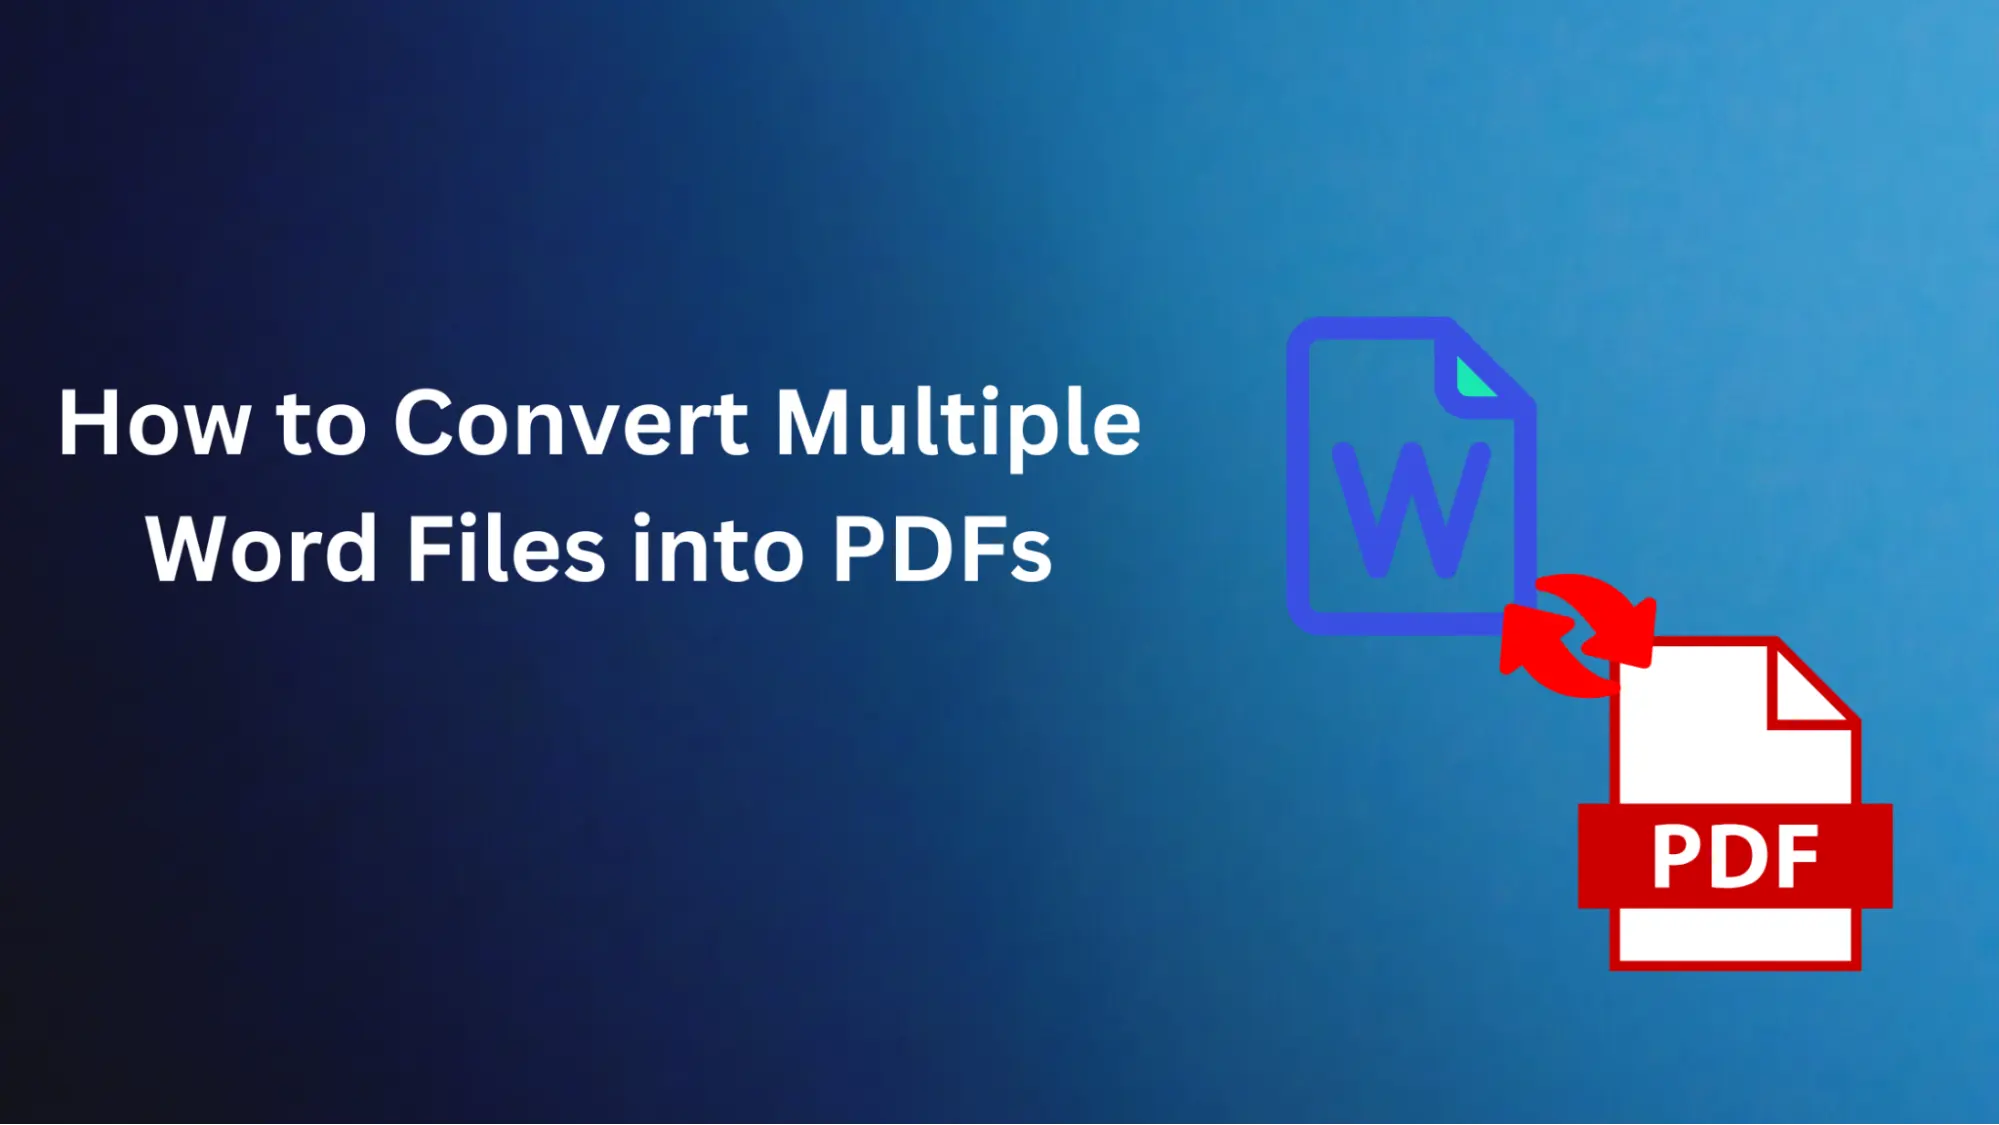 How to Convert Multiple Word Files into PDFs